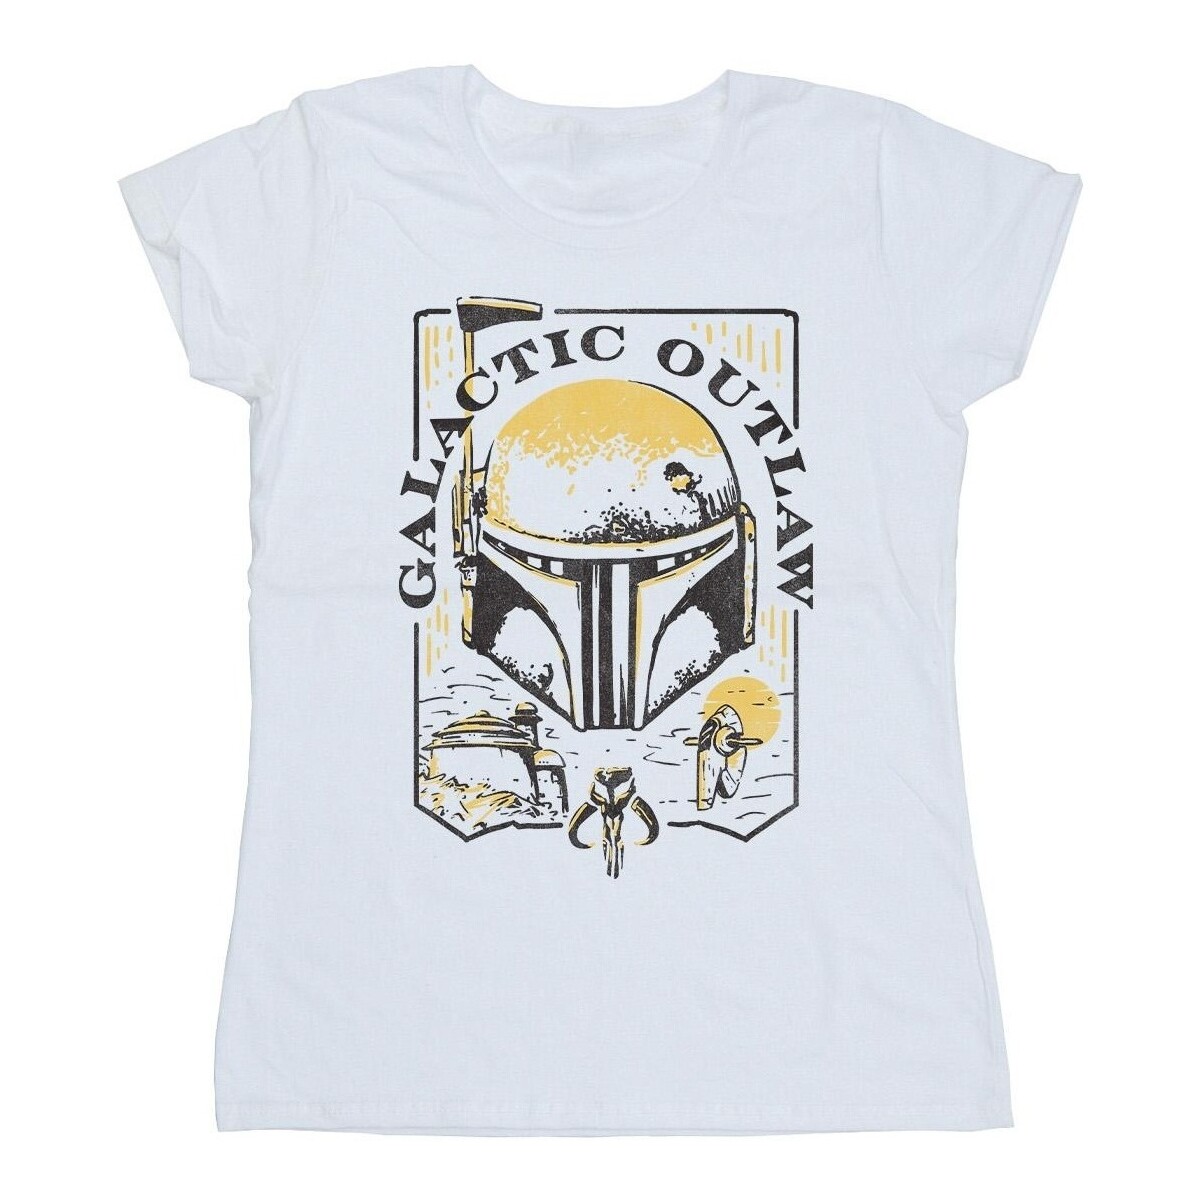 Vêtements Femme T-shirts manches longues Star Wars: The Book Of Boba Fett Galactic Outlaw Distress Blanc